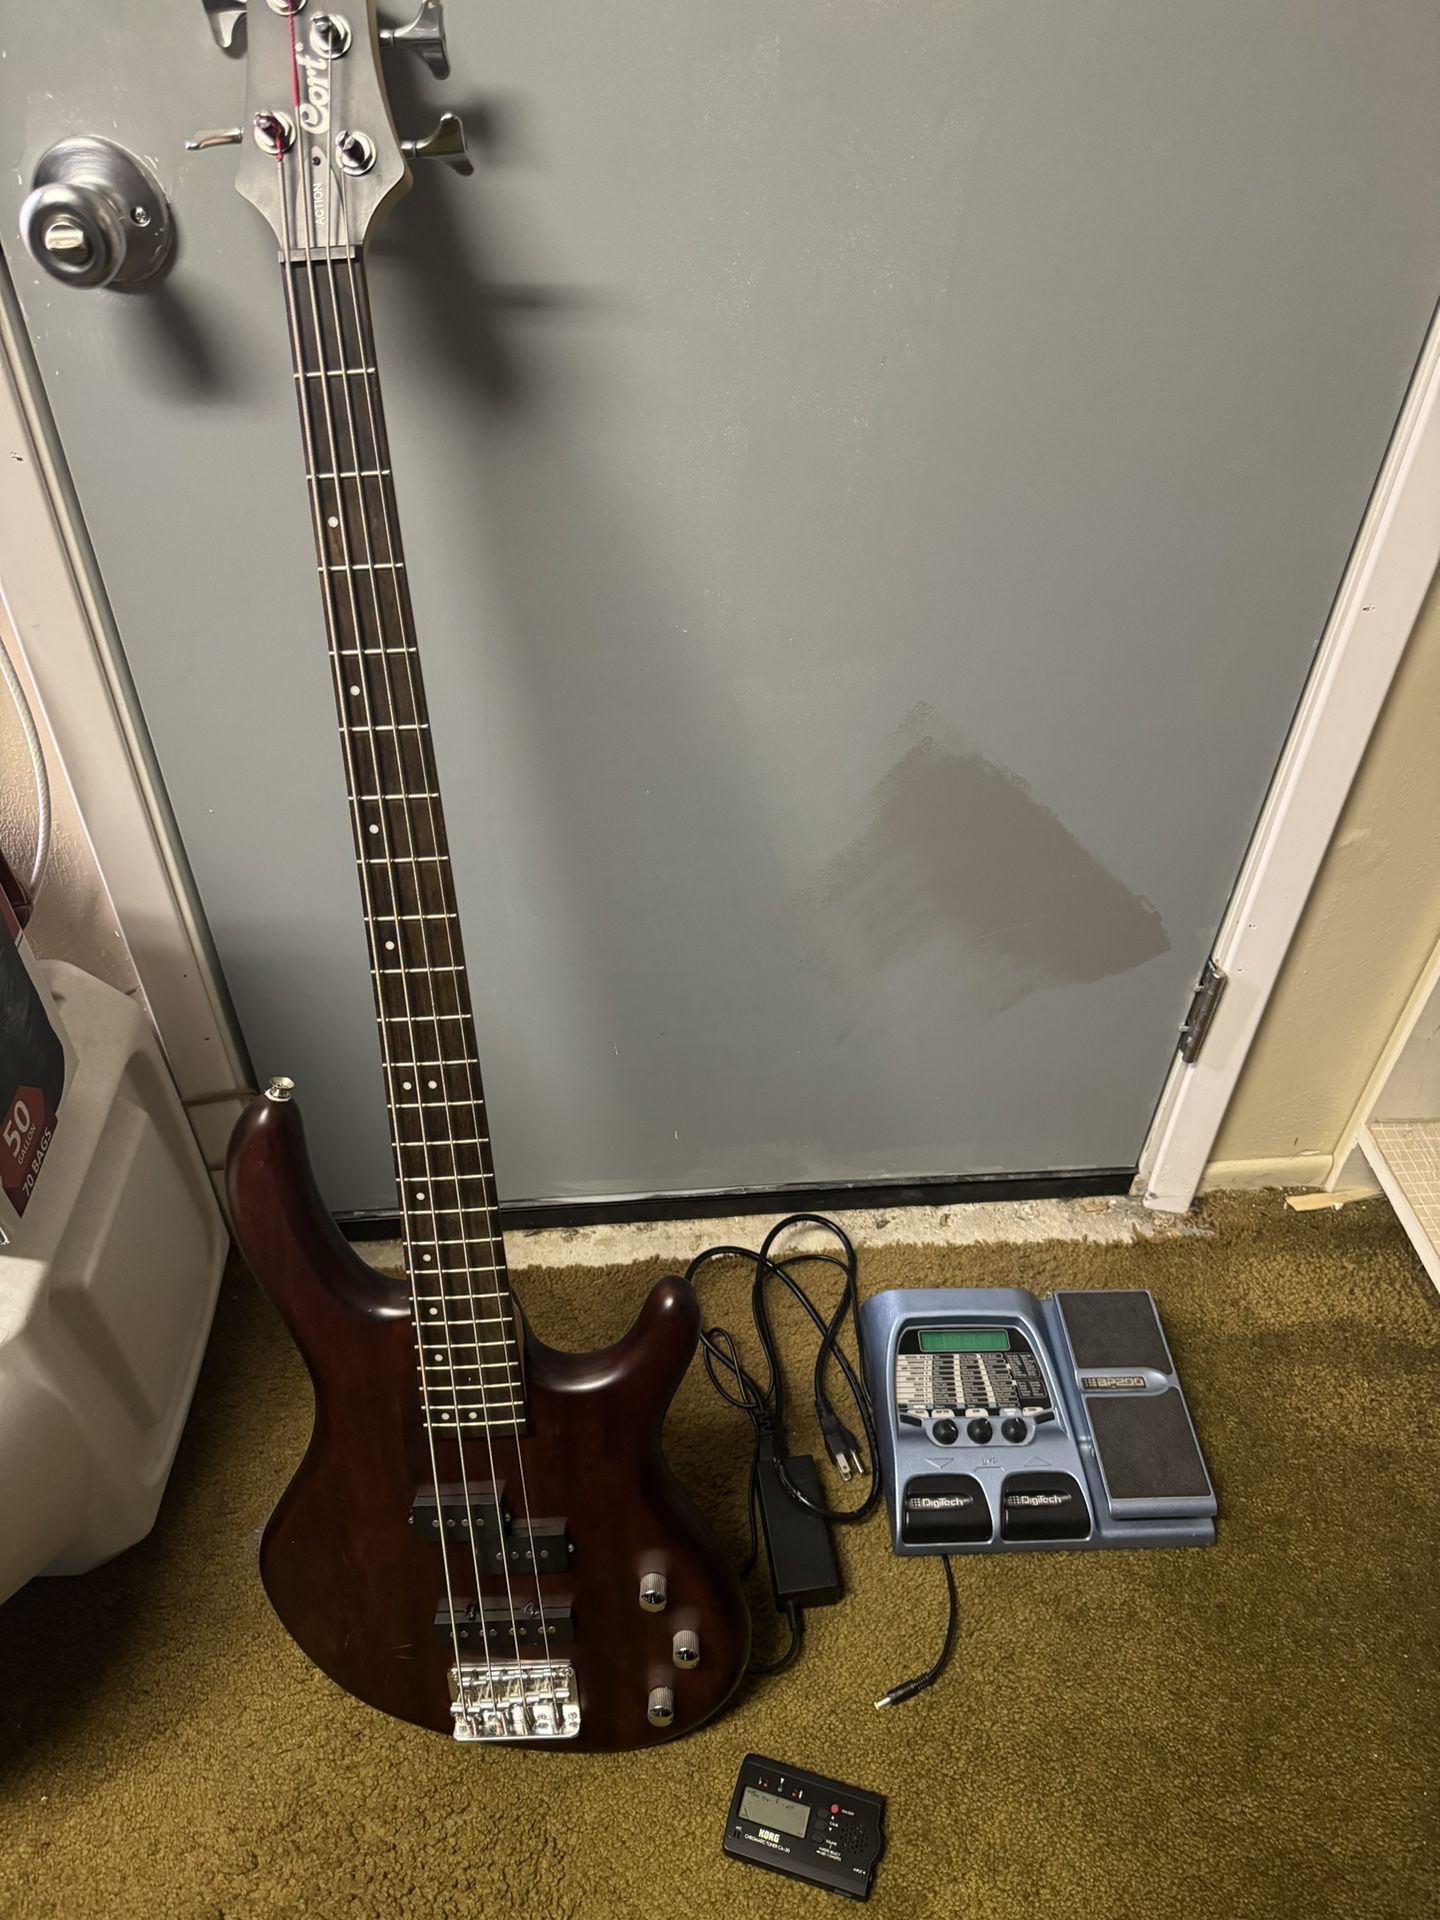 Bass guitar Cort Action, With Accessories.